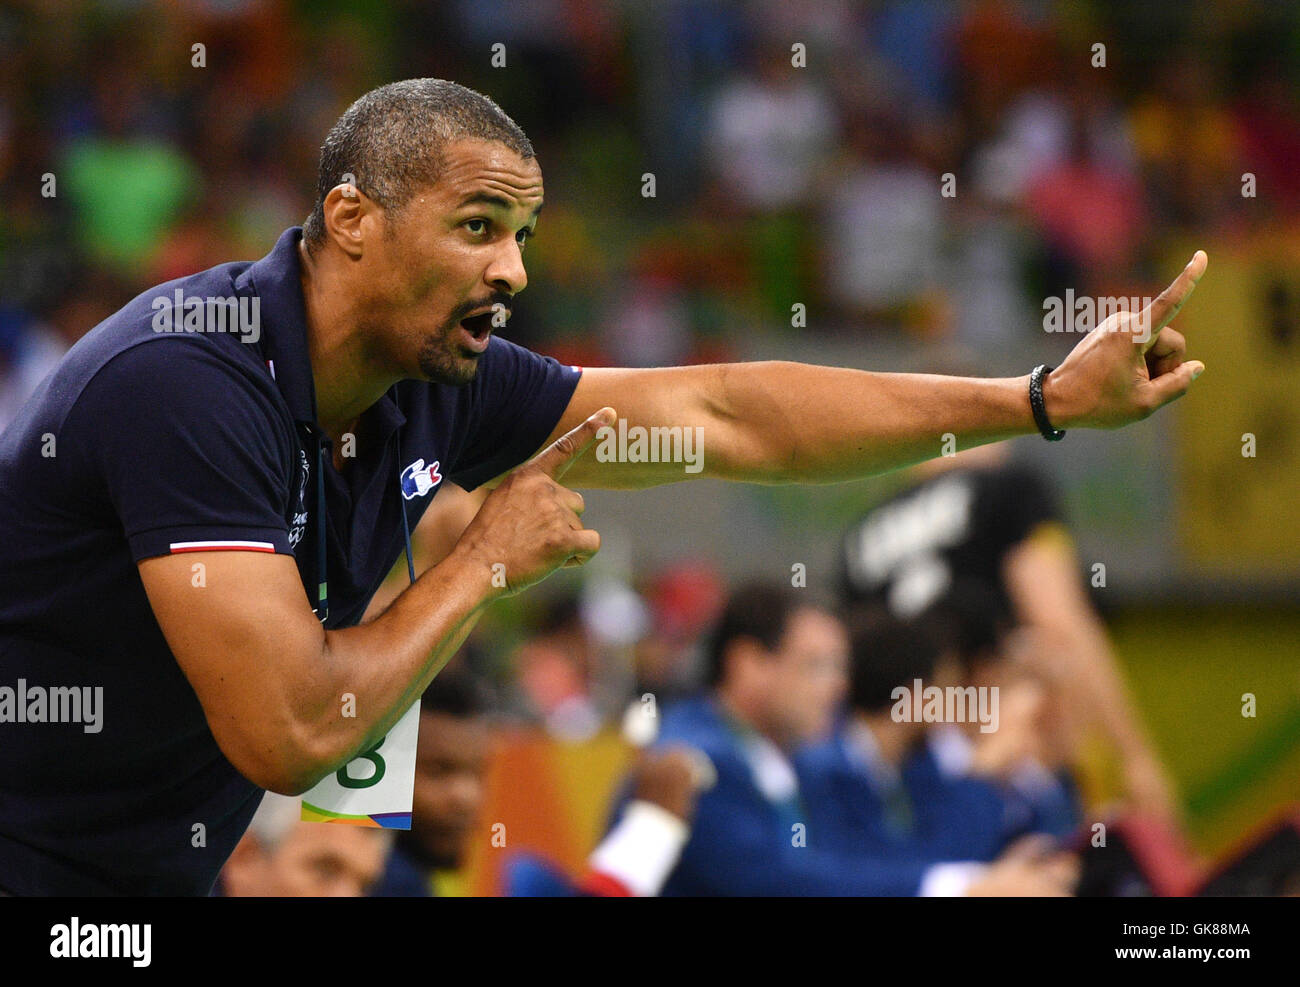 Rio de Janeiro, Brazil. 19th Aug, 2016. Coach Claude Onesta of France gestures during the Men's Semifinal match between France and Germany of the Handball events during the Rio 2016 Olympic Games in Rio de Janeiro, Brazil, 19 August 2016. Photo: Lukas Schulze /dpa/Alamy Live News Stock Photo